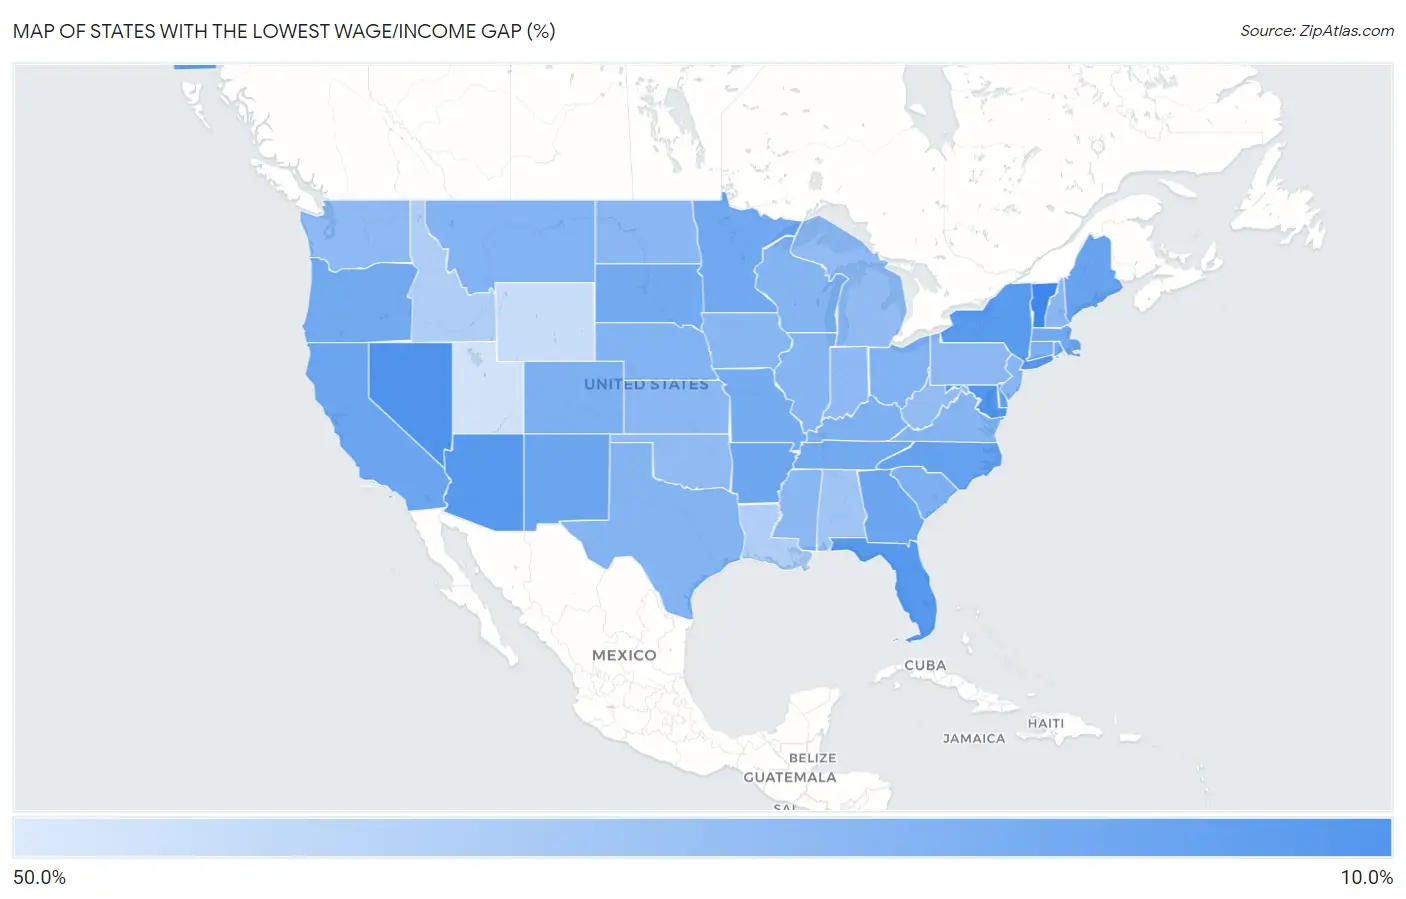 States with the Lowest Wage/Income Gap (%) in the United States Map